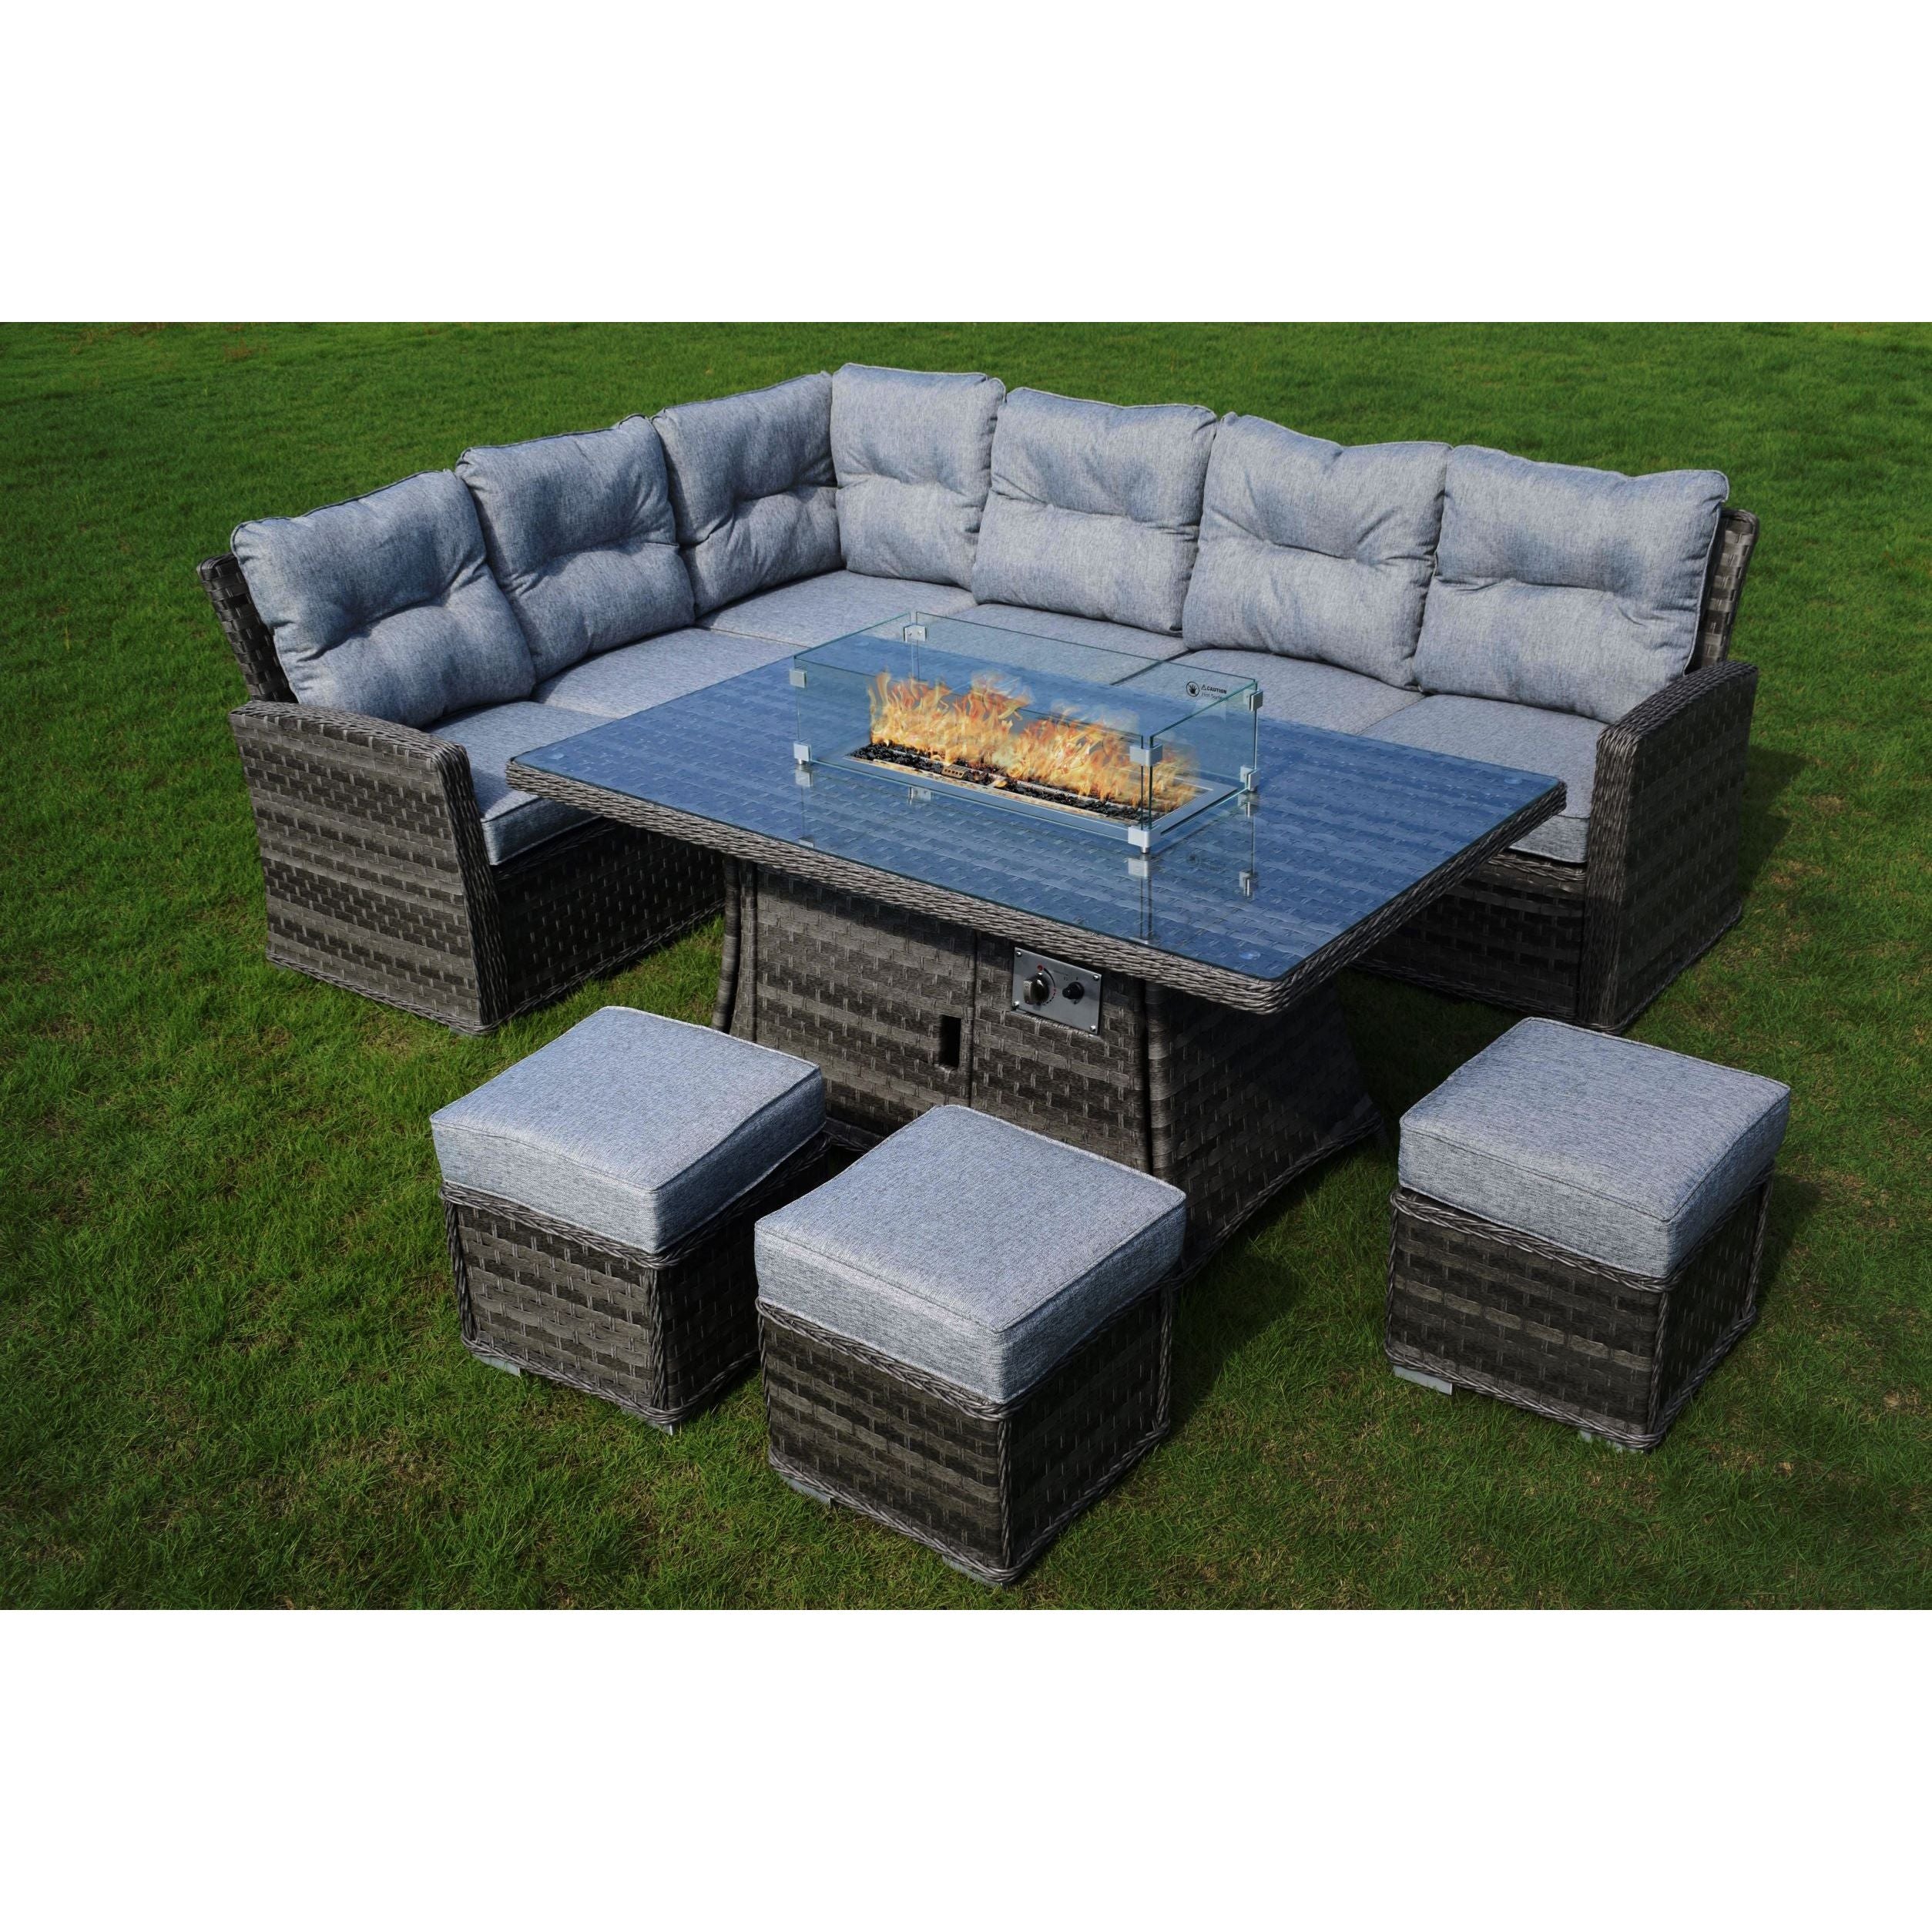 Amalfi Casual Corner Set with Firepit Table - Large